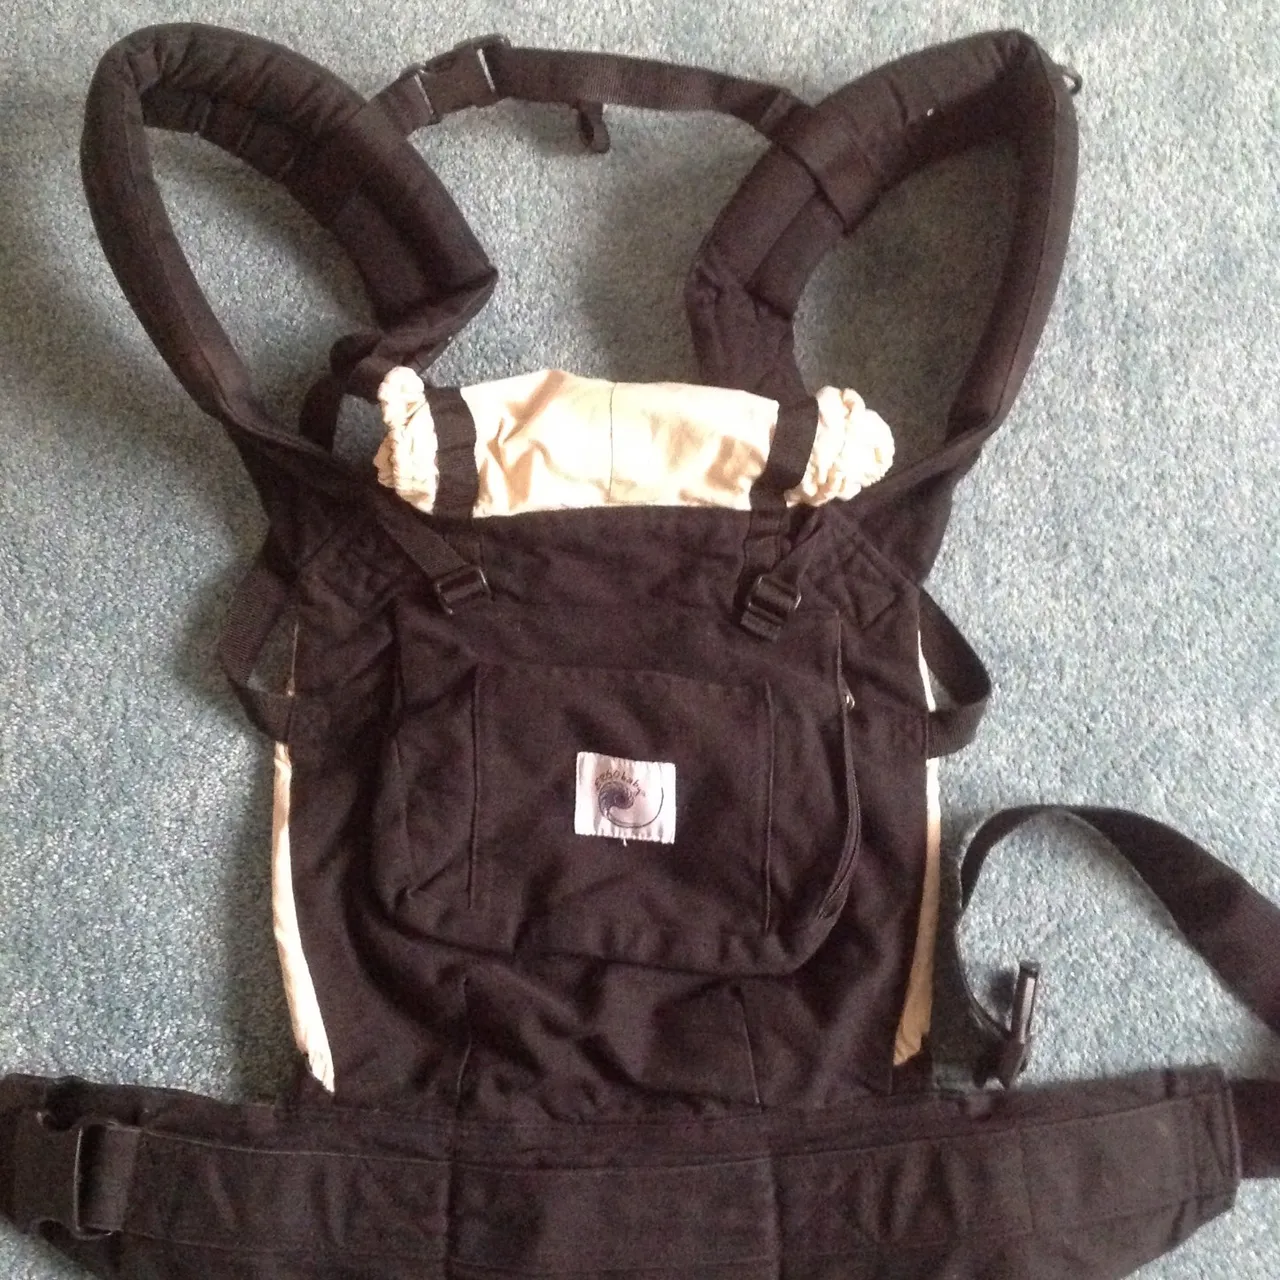 Baby Carrier photo 1